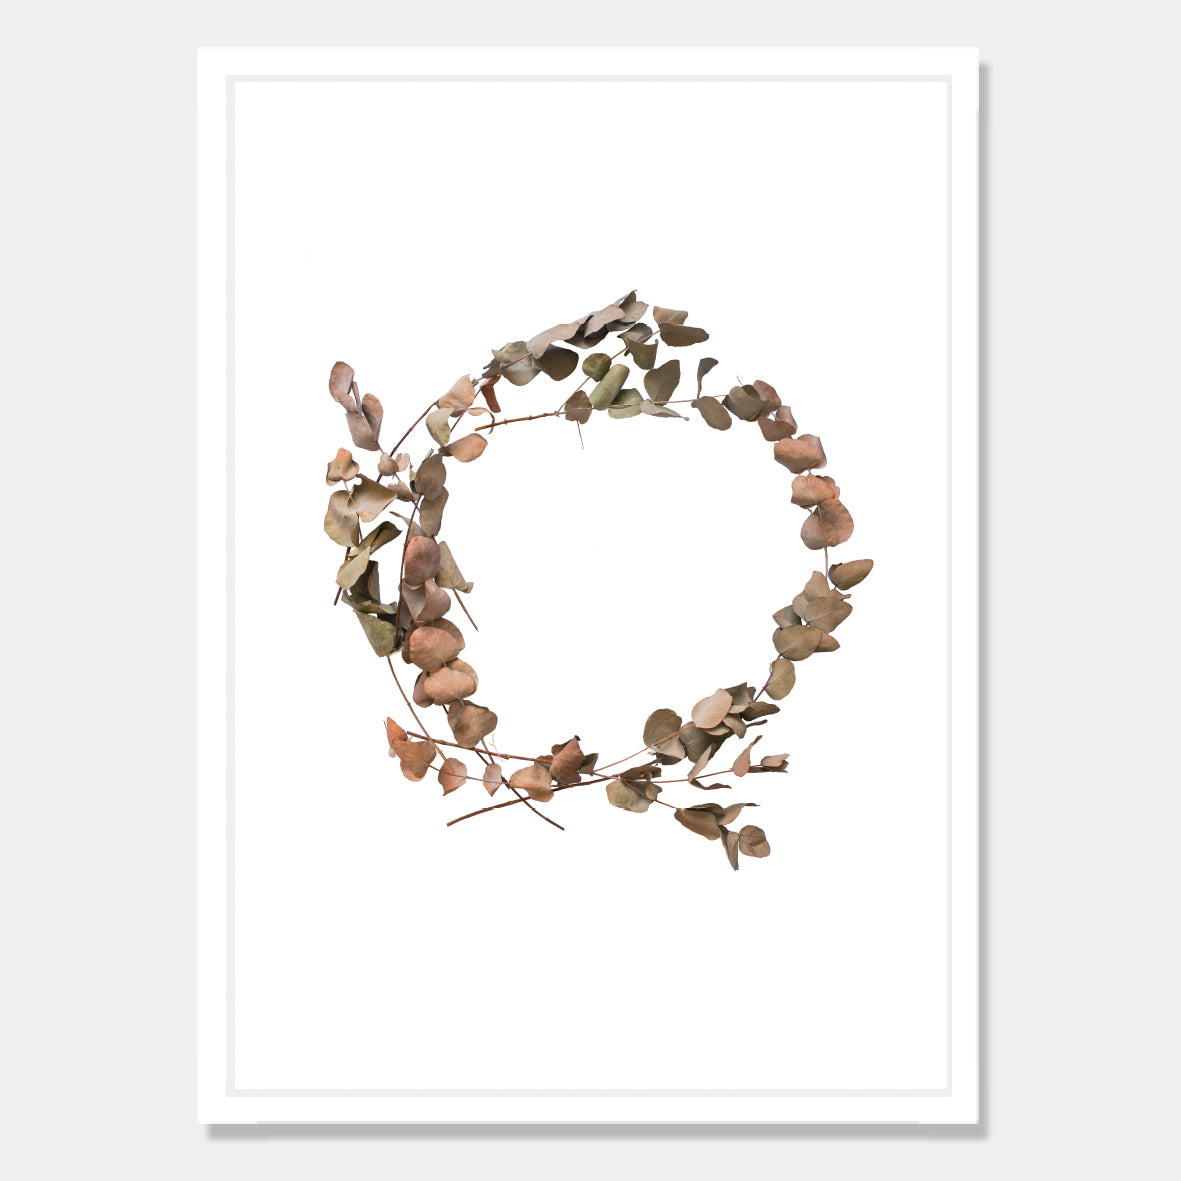 Photographic art print of dried leaves in a o shape by Bon Jung. Printed in New Zealand by endemicworld and framed in white.